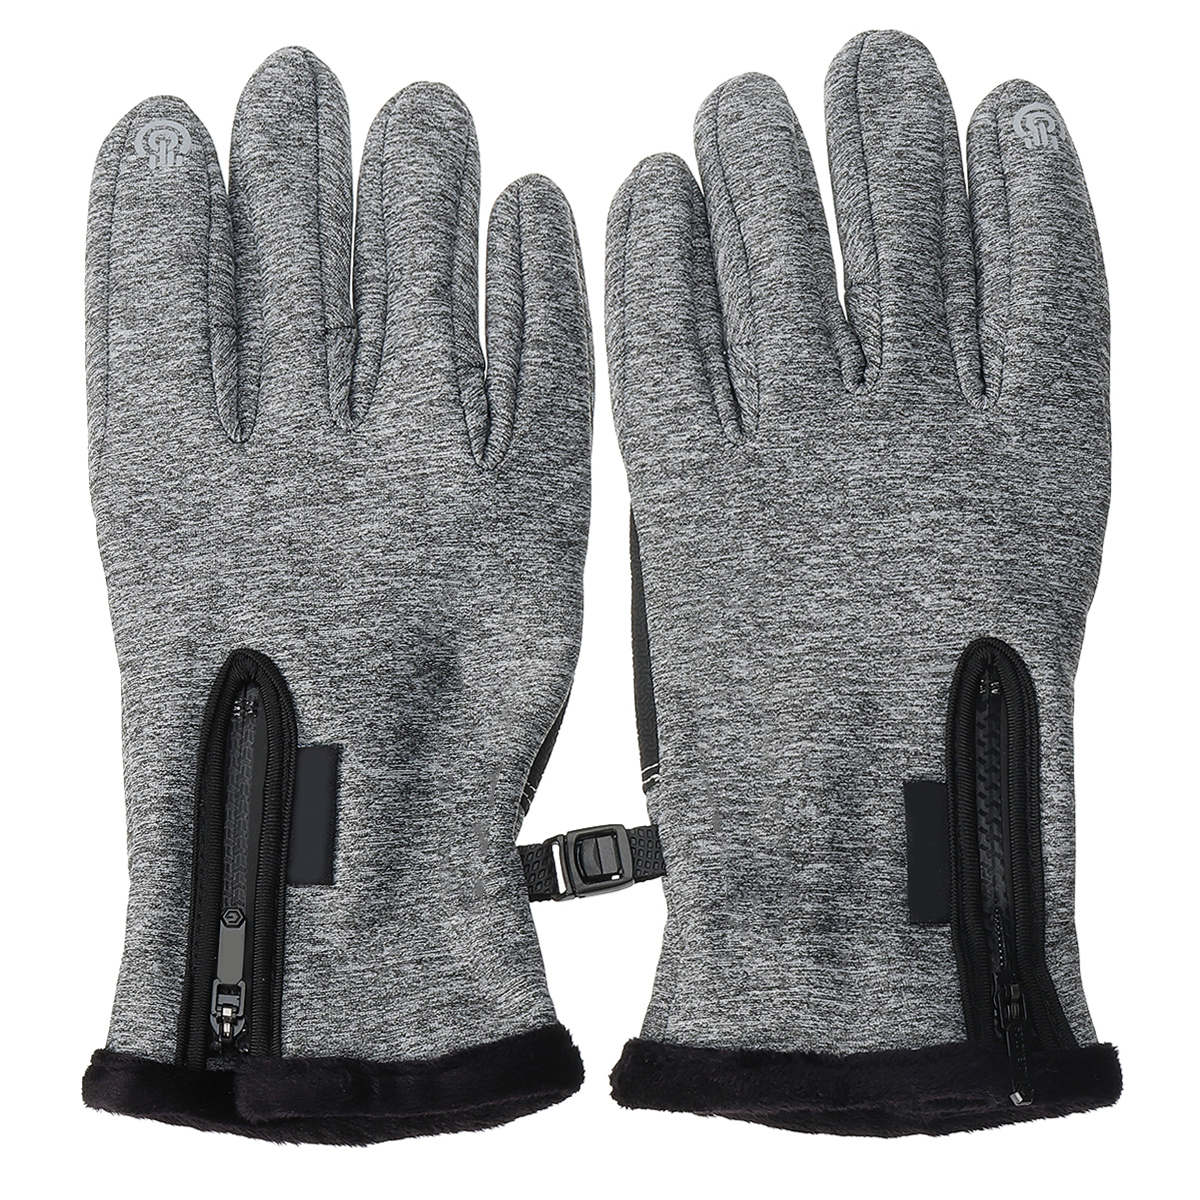 XL-Size-Winter-Warm-Waterproof-Windproof-Anti-Slip-Touch-Screen-Outdoors-Motorcycle-Riding-Gloves-1856137-3